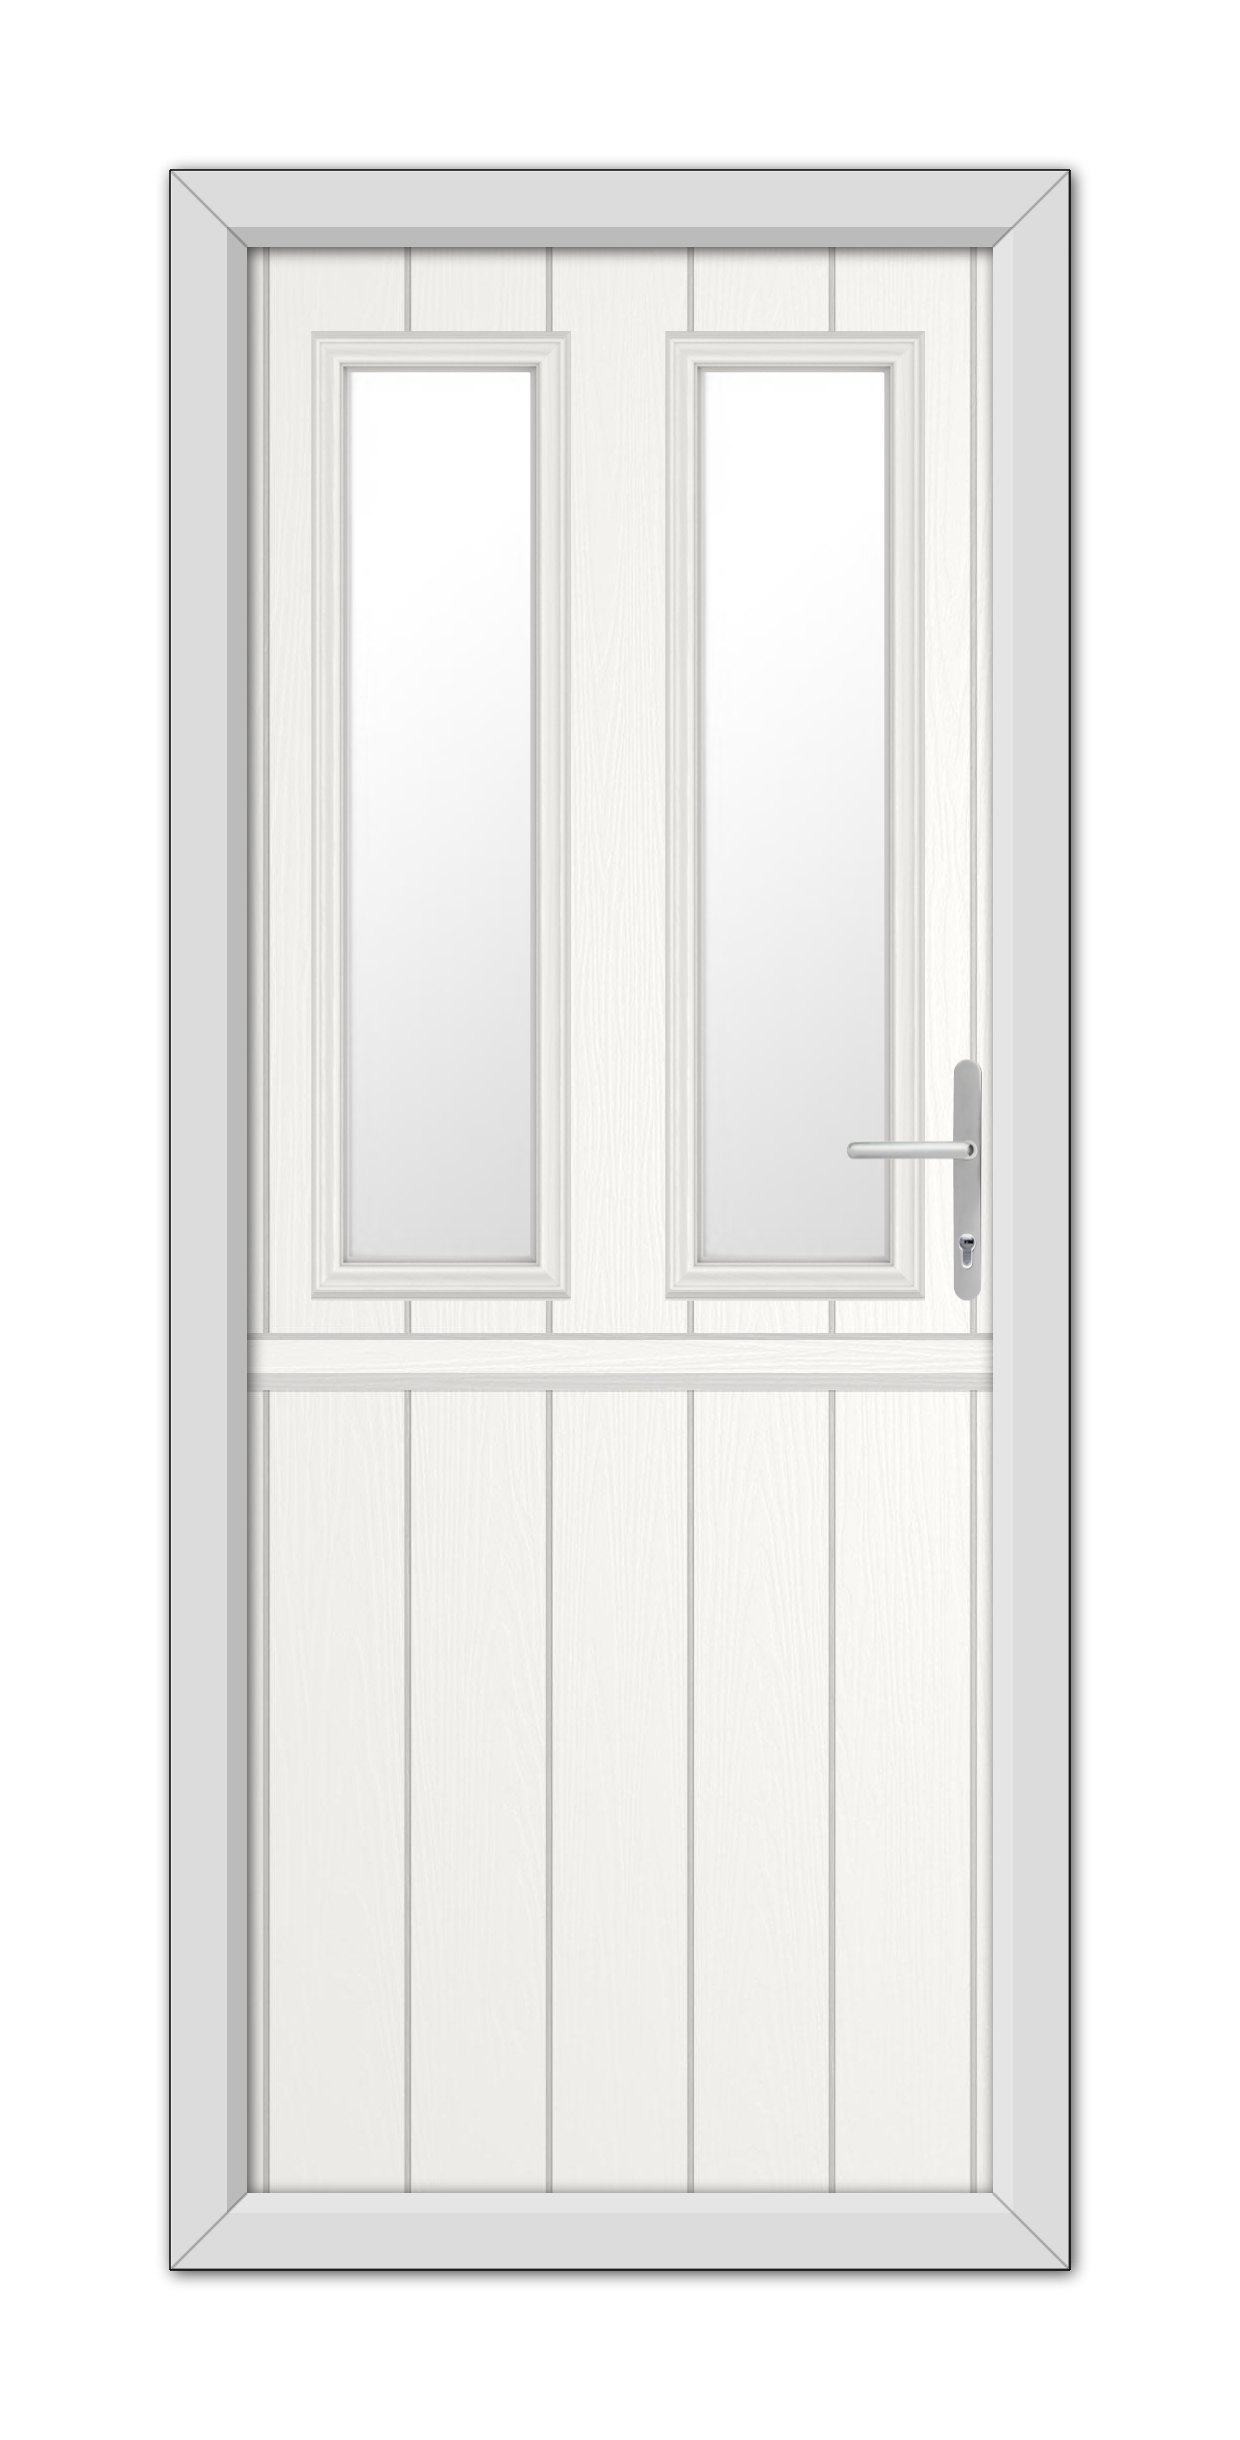 White Wellington Stable Composite Door with a metallic handle on the right side, featuring upper half glass panels in a grey frame.